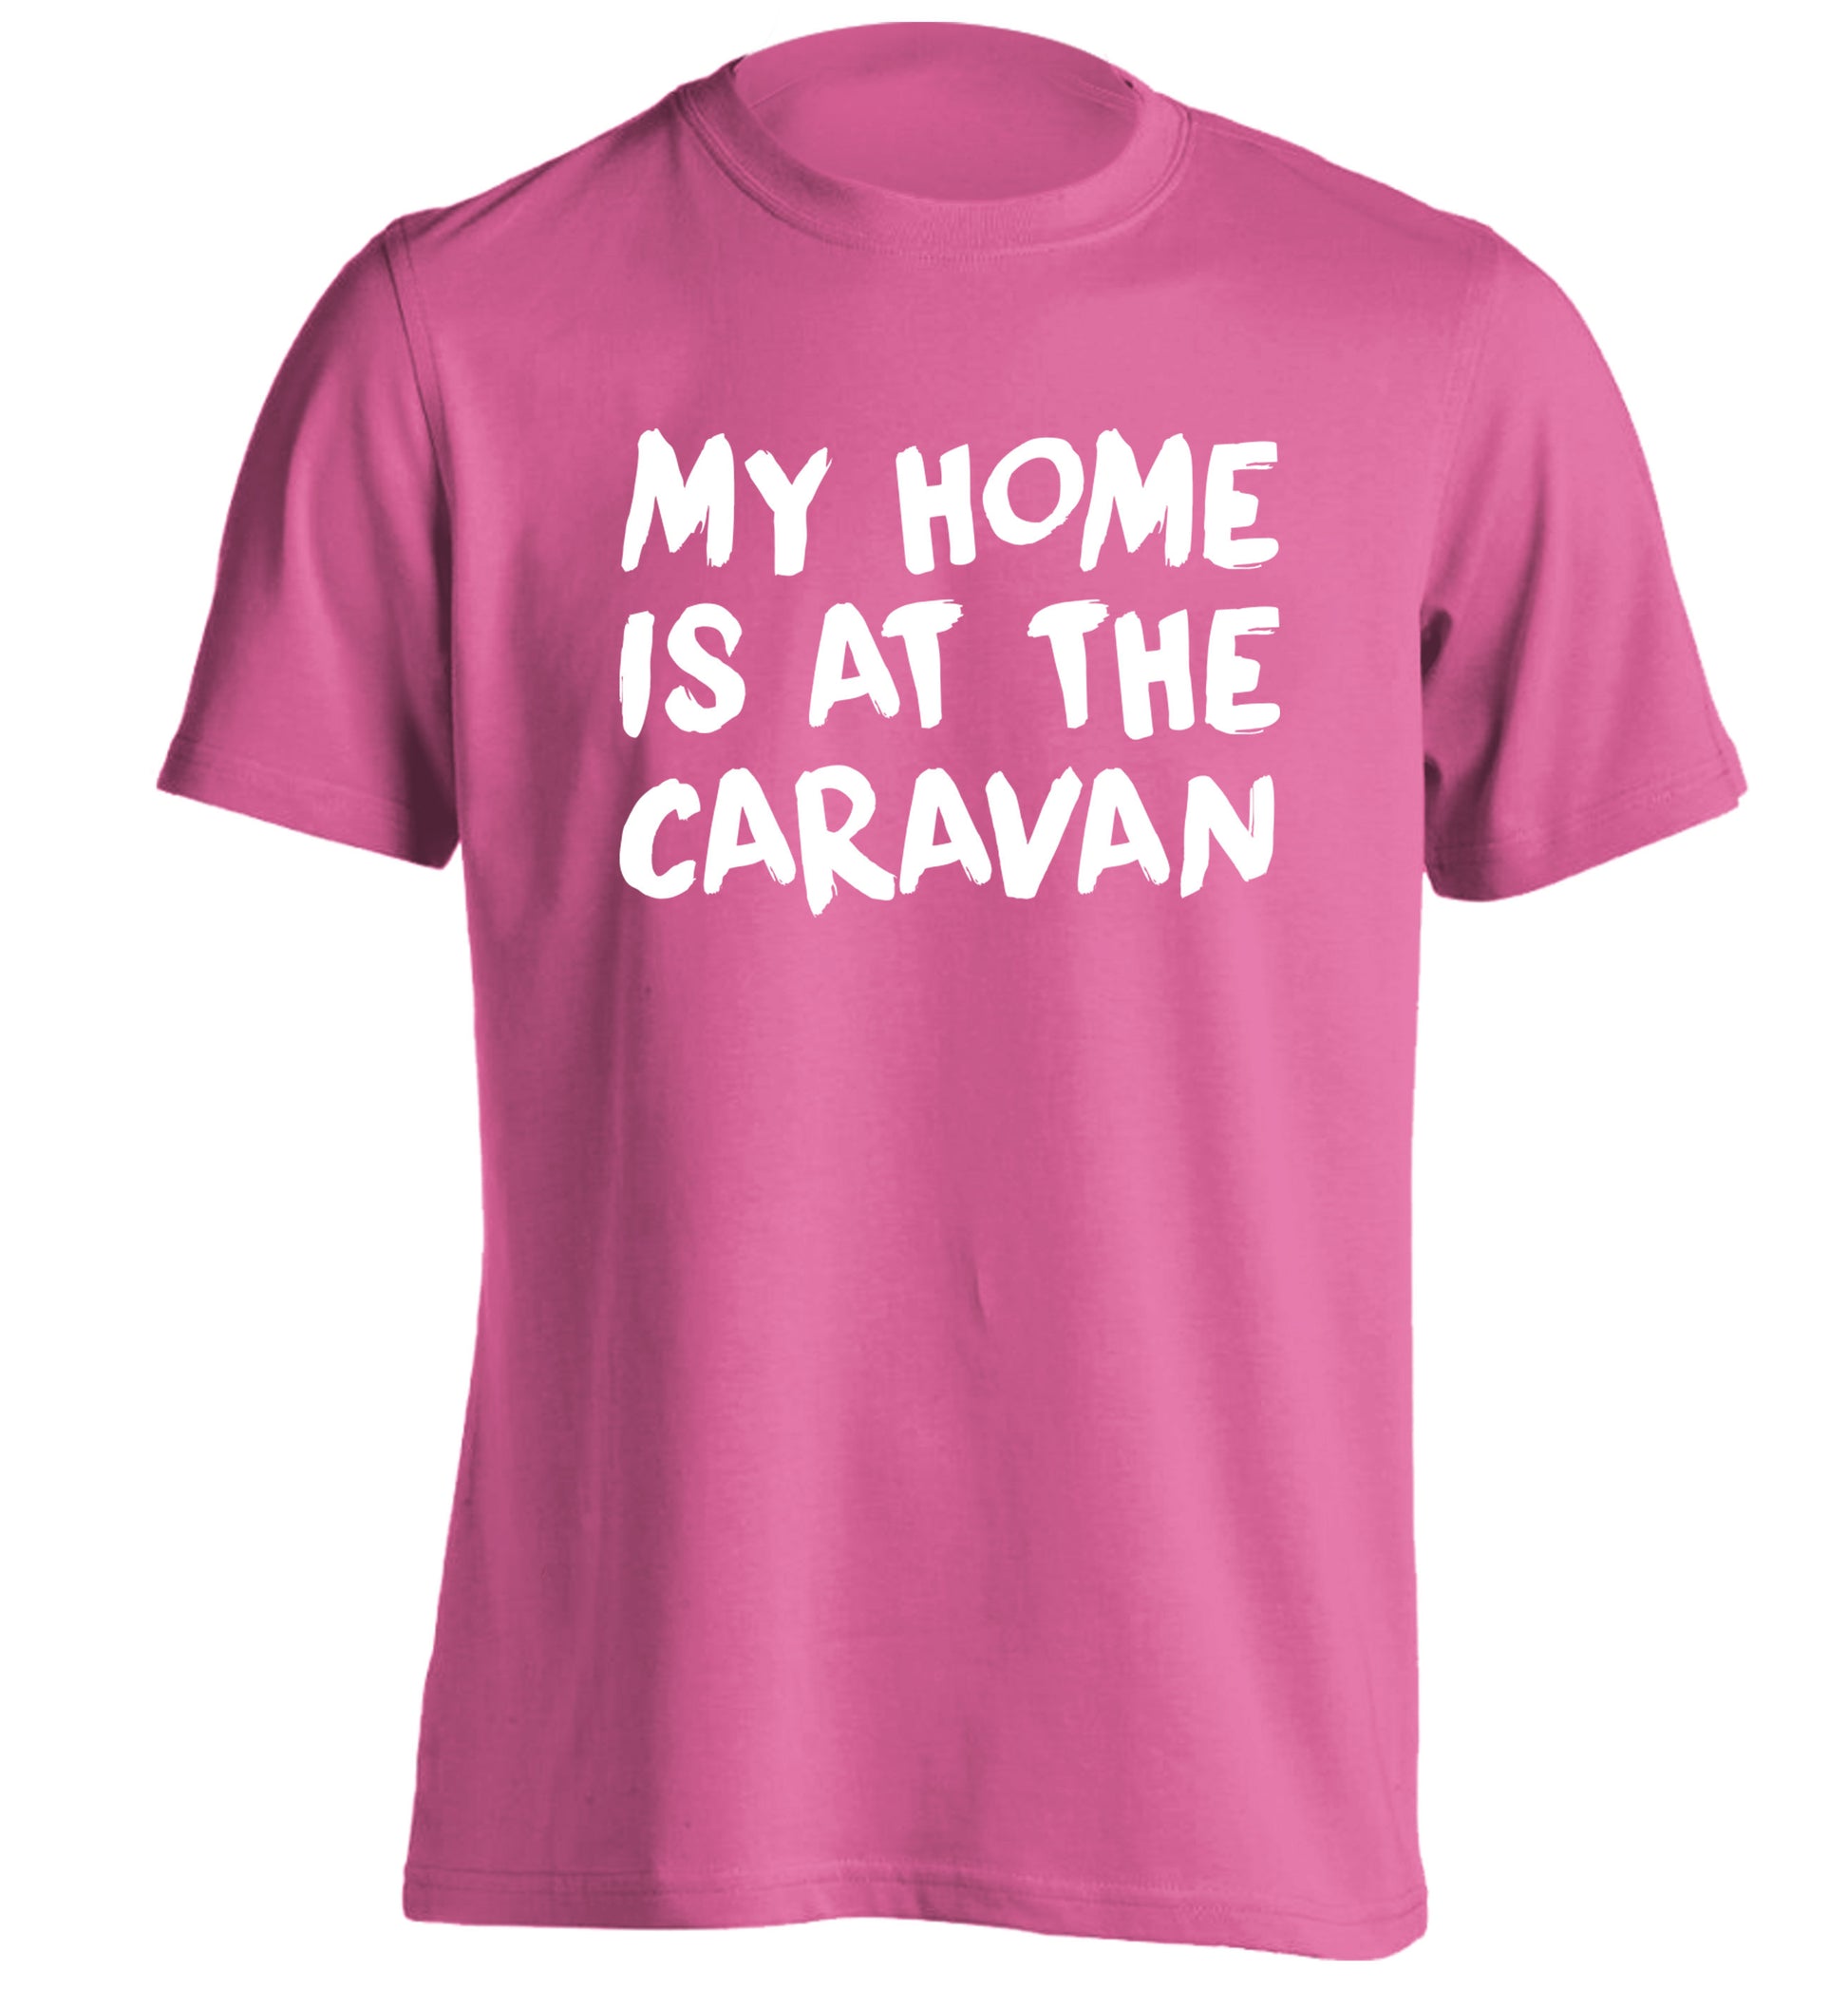 My home is at the caravan adults unisex pink Tshirt 2XL